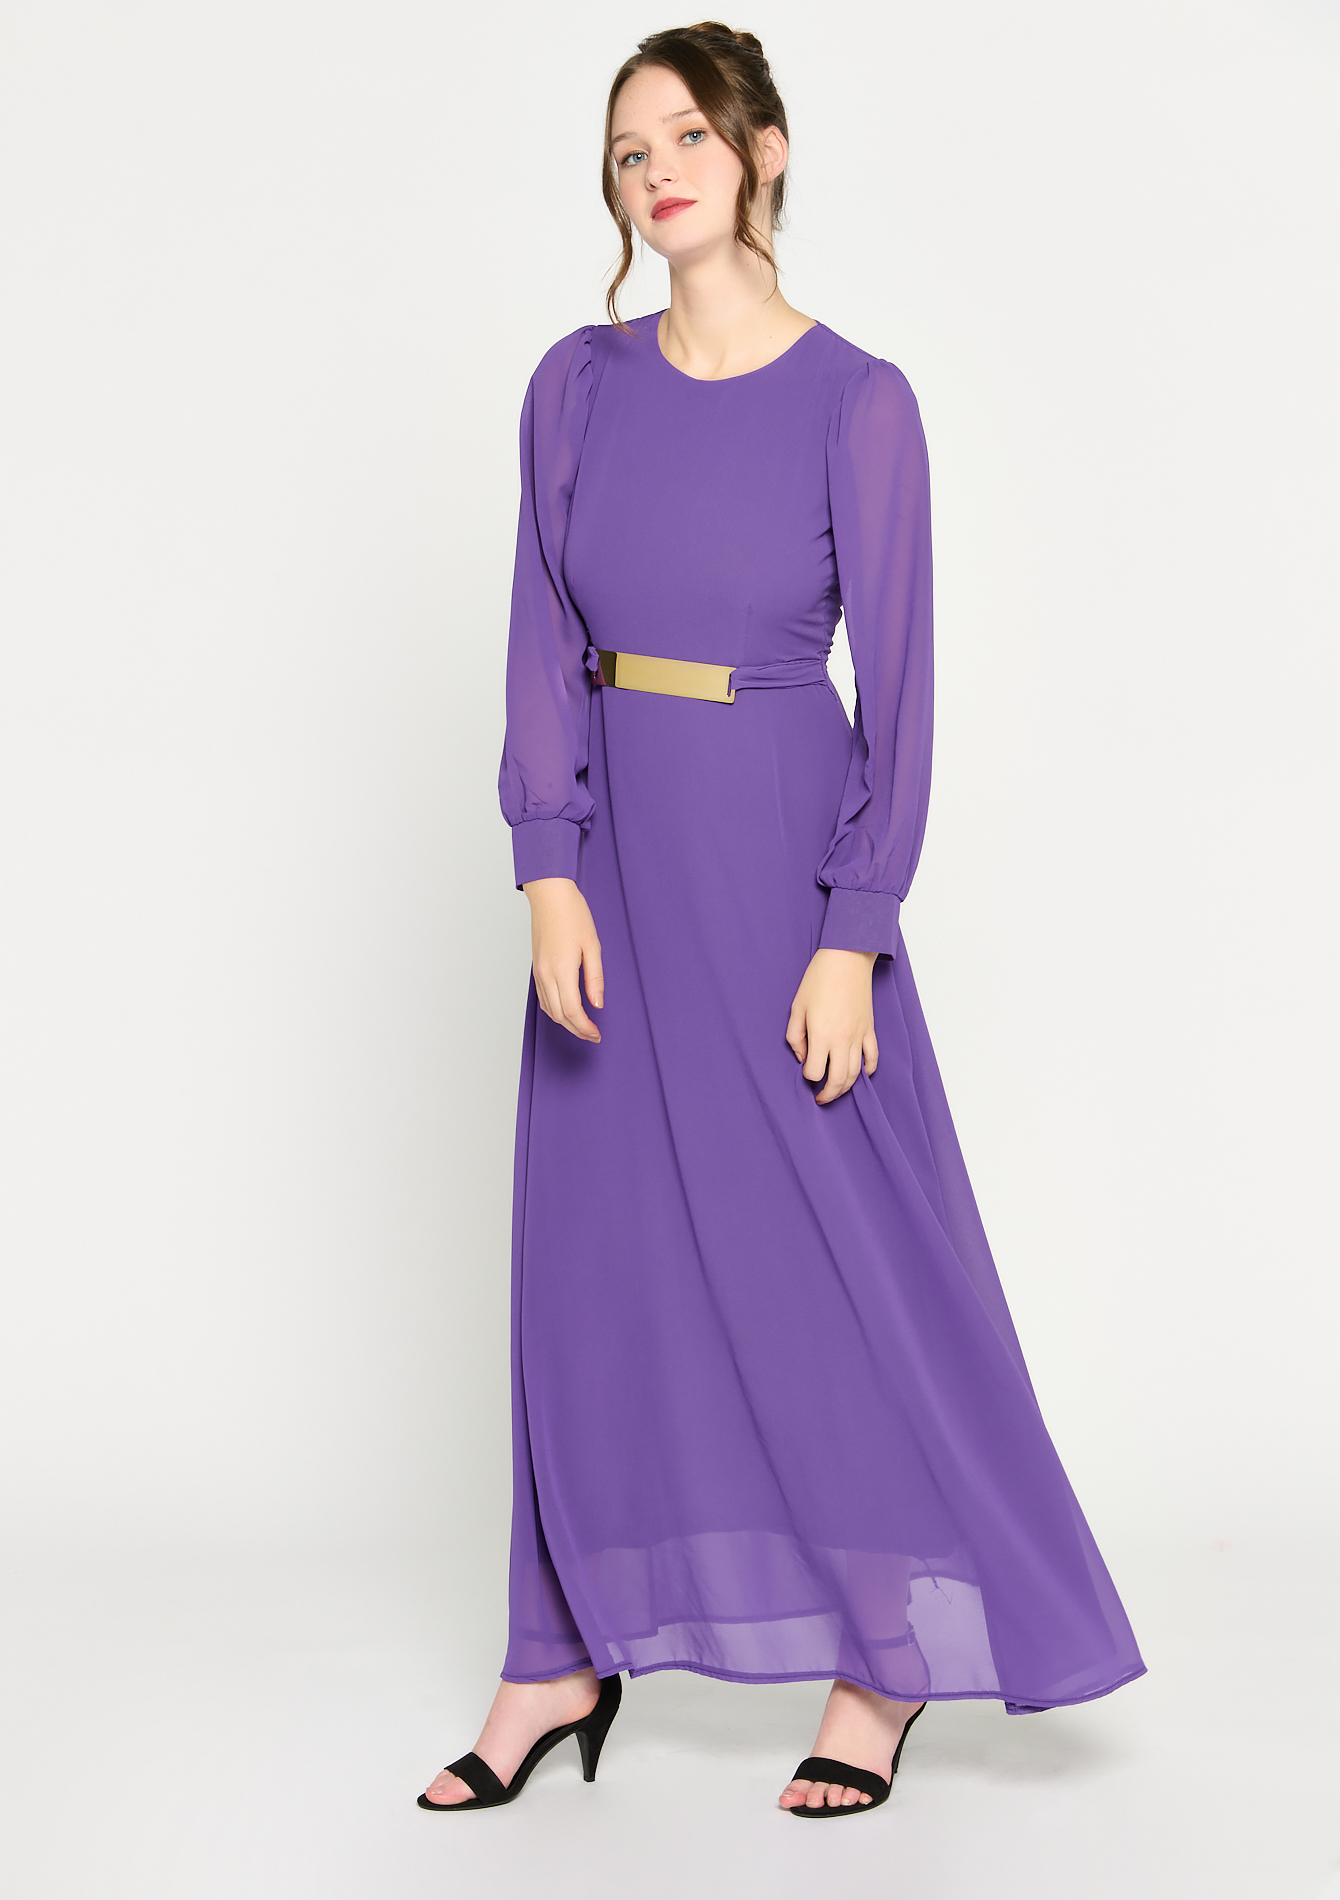 Maxi dress with open back - VIOLET BLUE - 08601496_1611